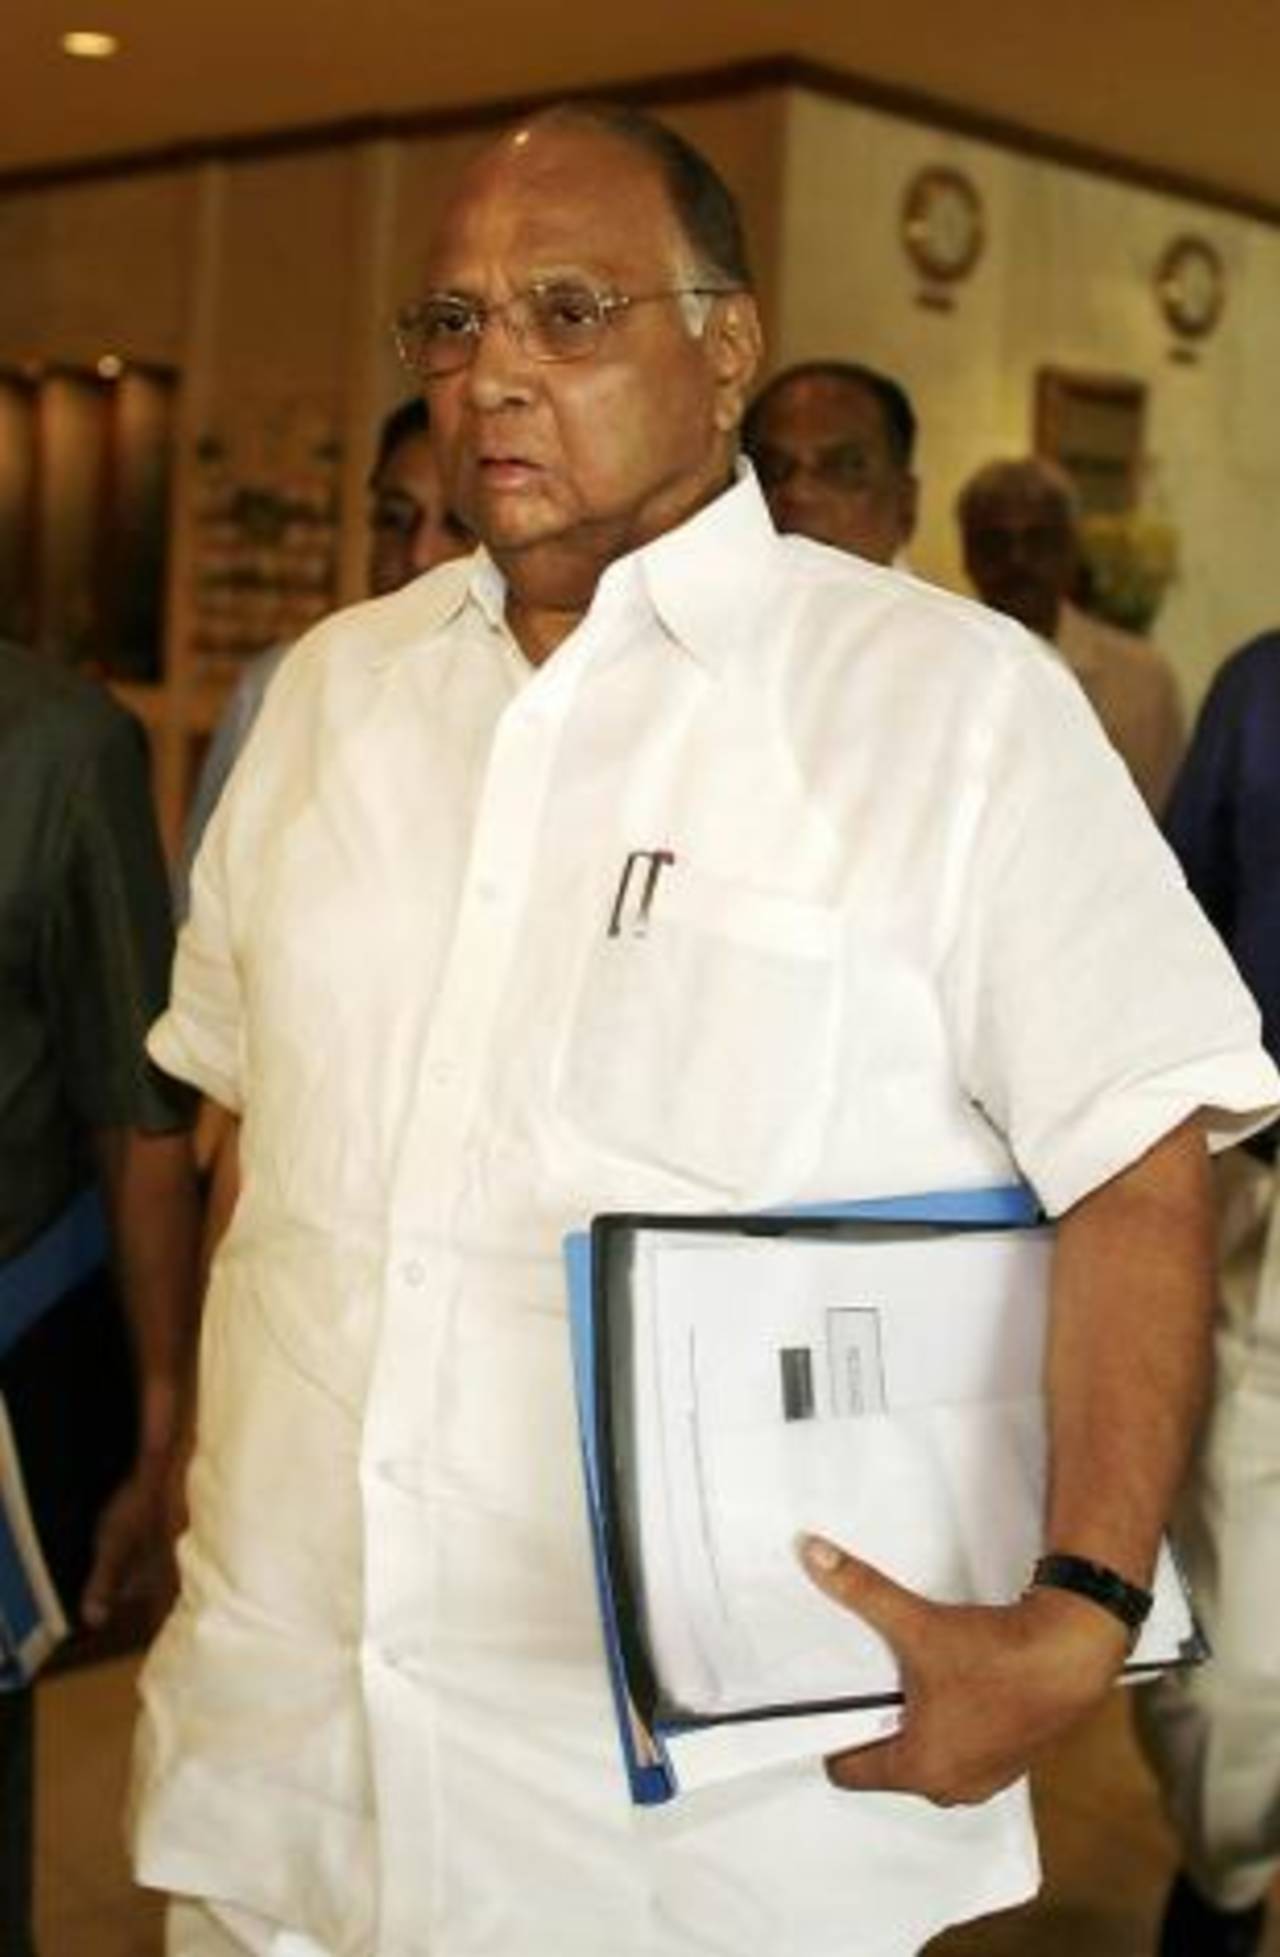 Sharad Pawar arrives for the BCCI's working committee meeting, New Delhi, June 12, 2007